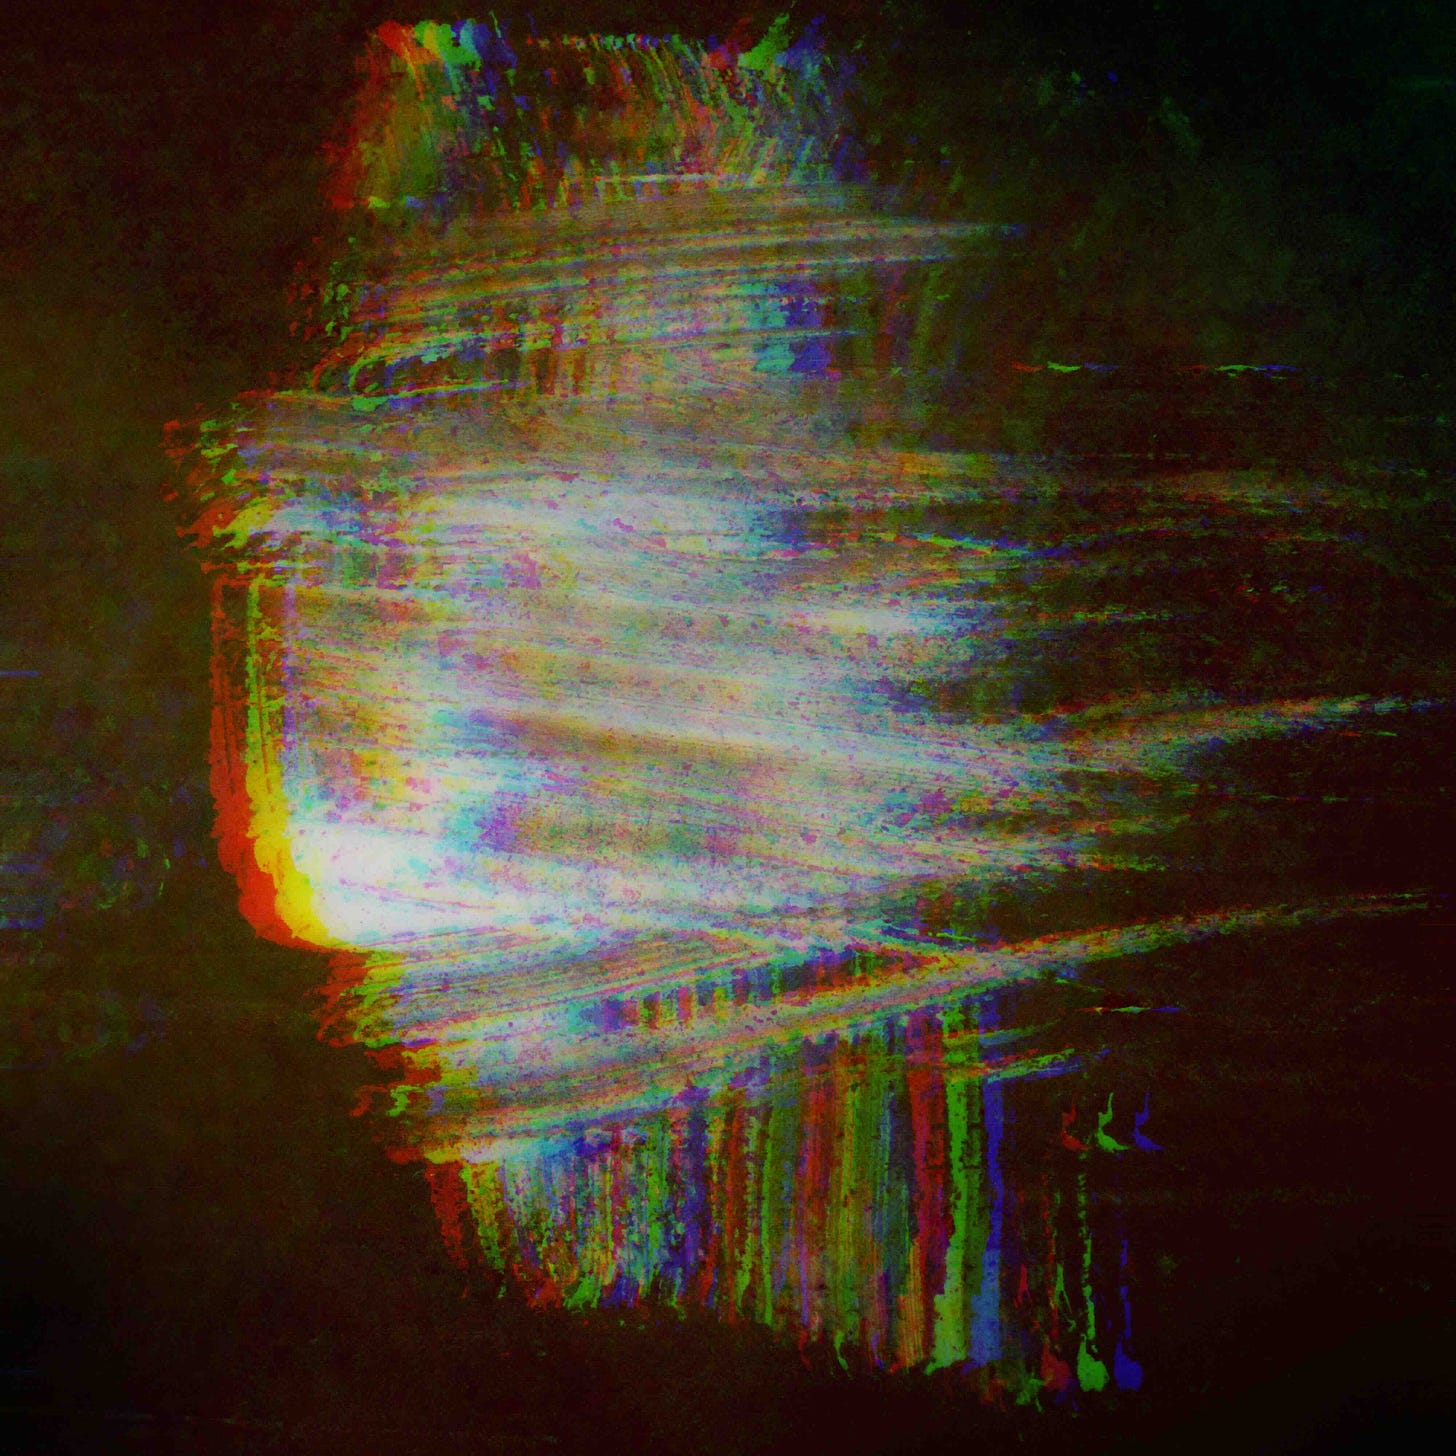 A smear of multi-coloured light against a dark screen. An abstract photo made by Matteo Delred.